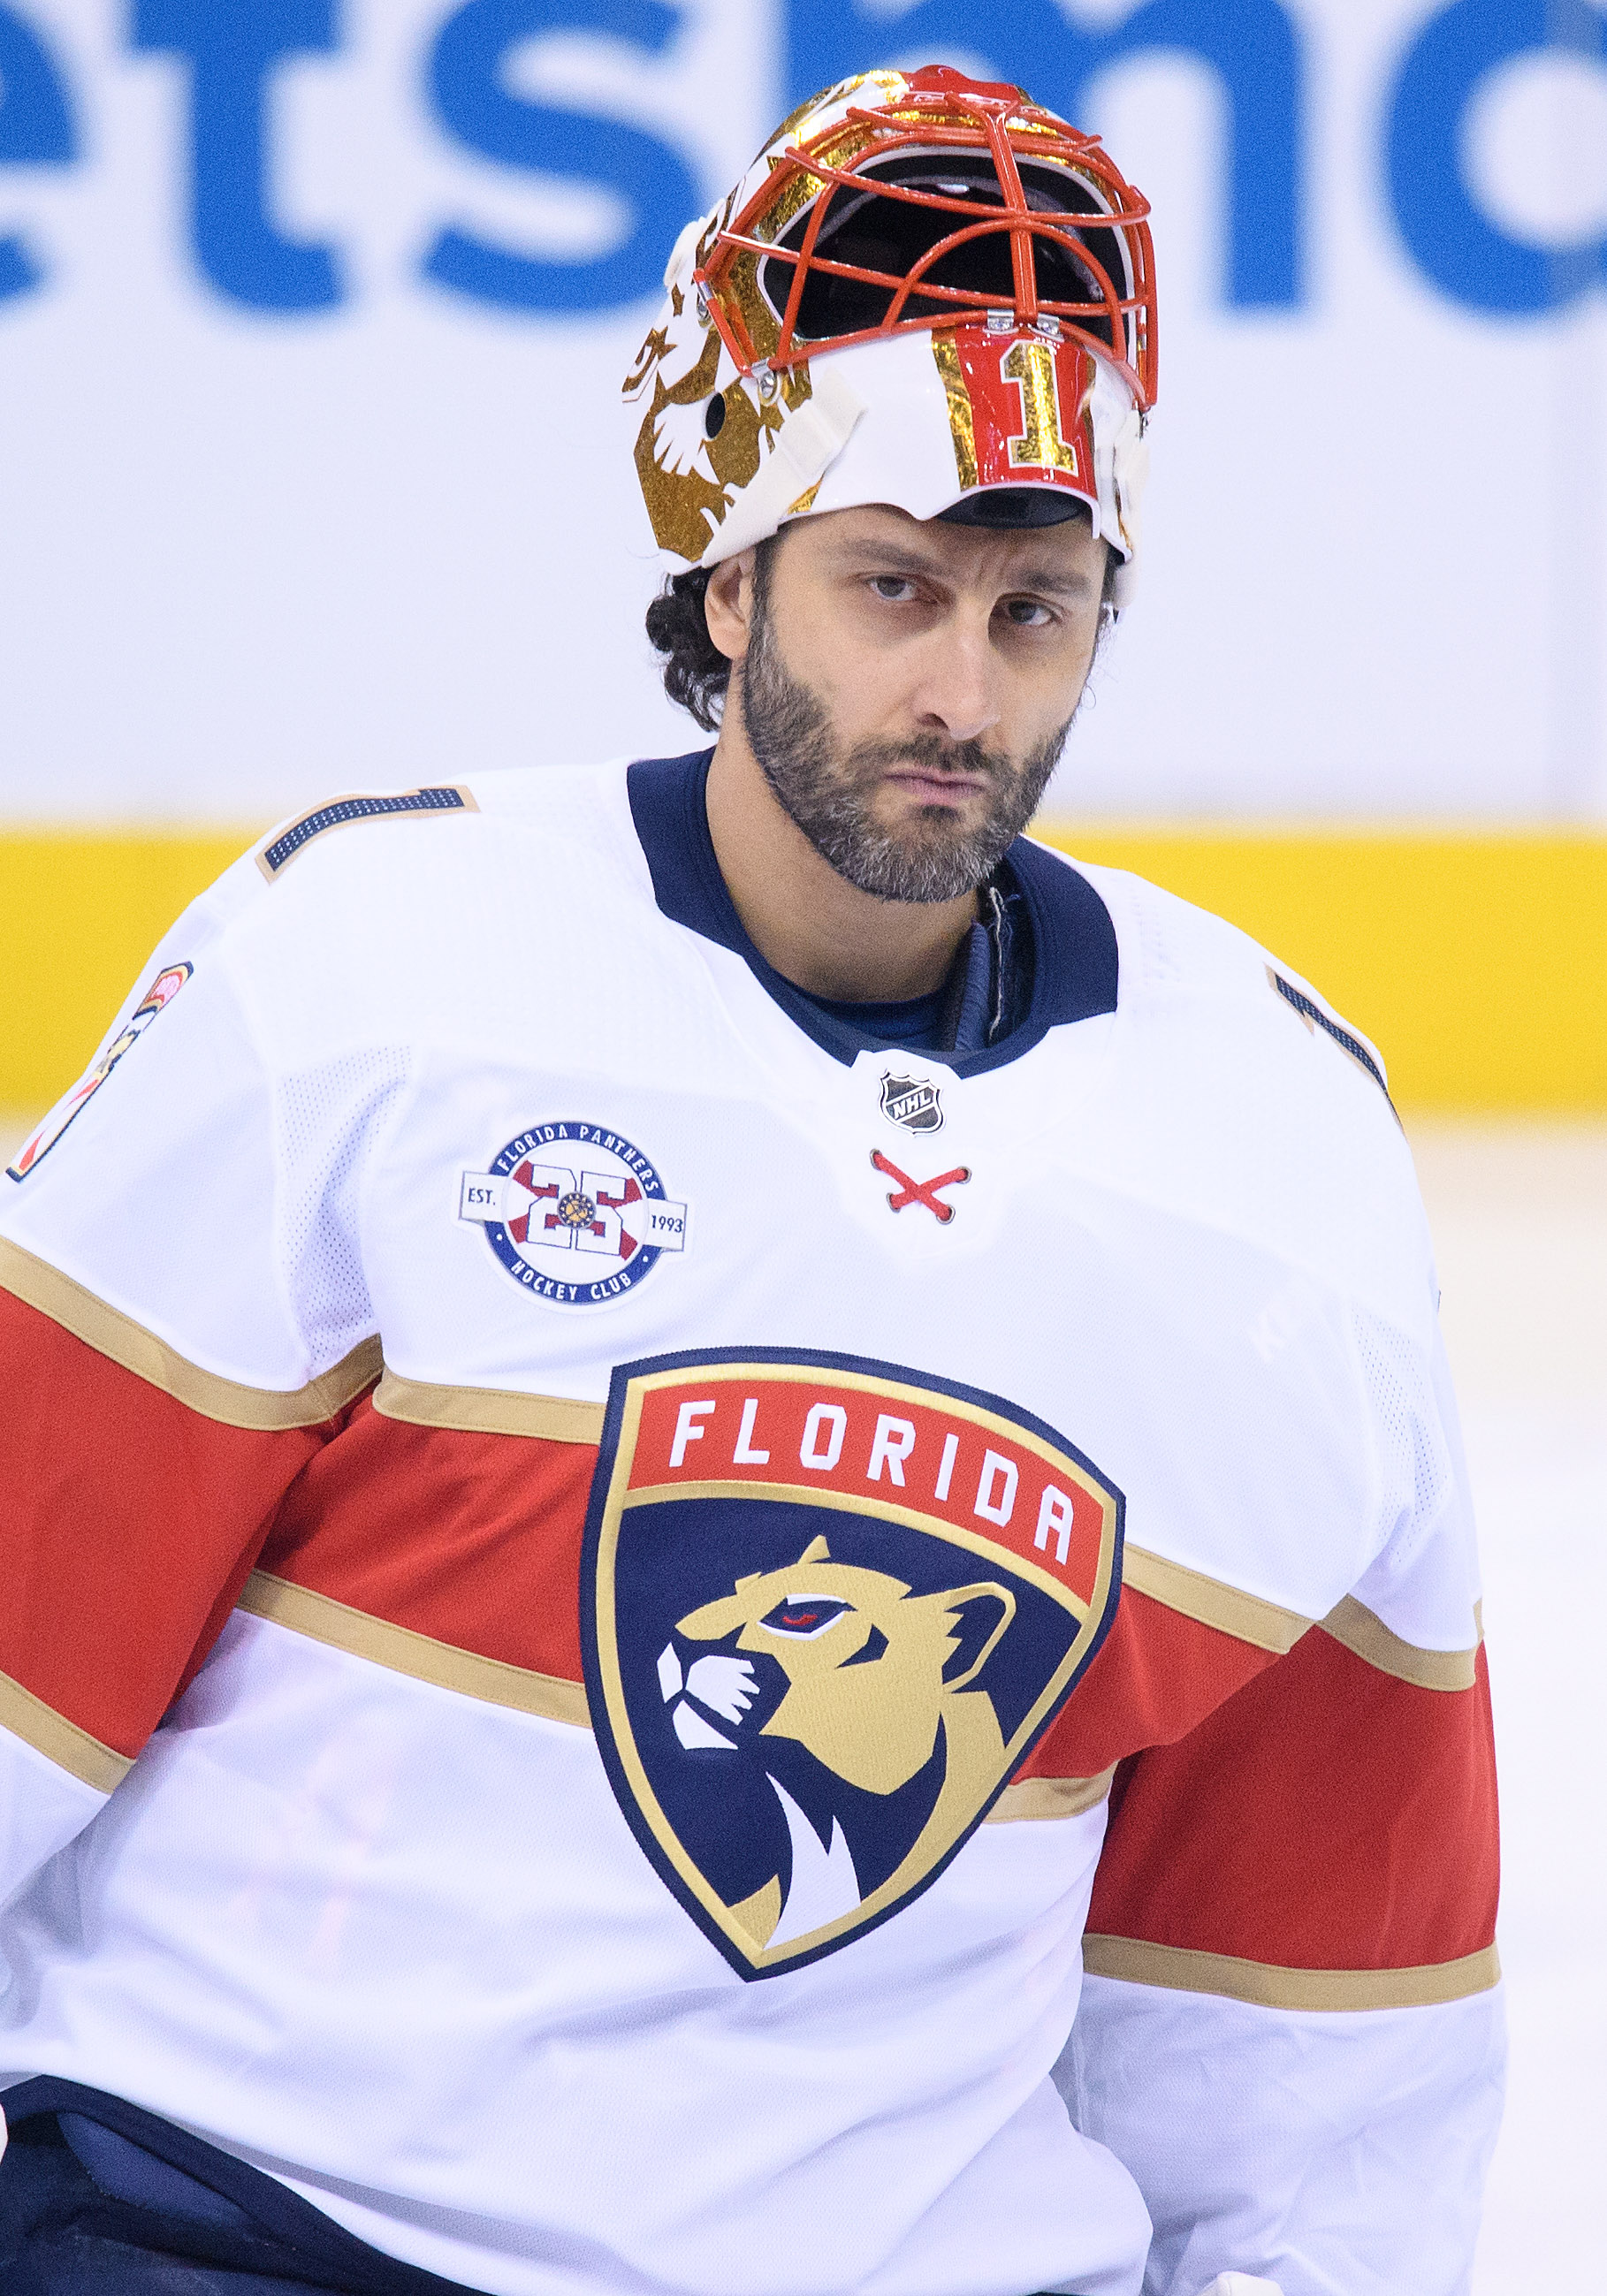 Sportsnet - Roberto Luongo will be inducted into the Vancouver